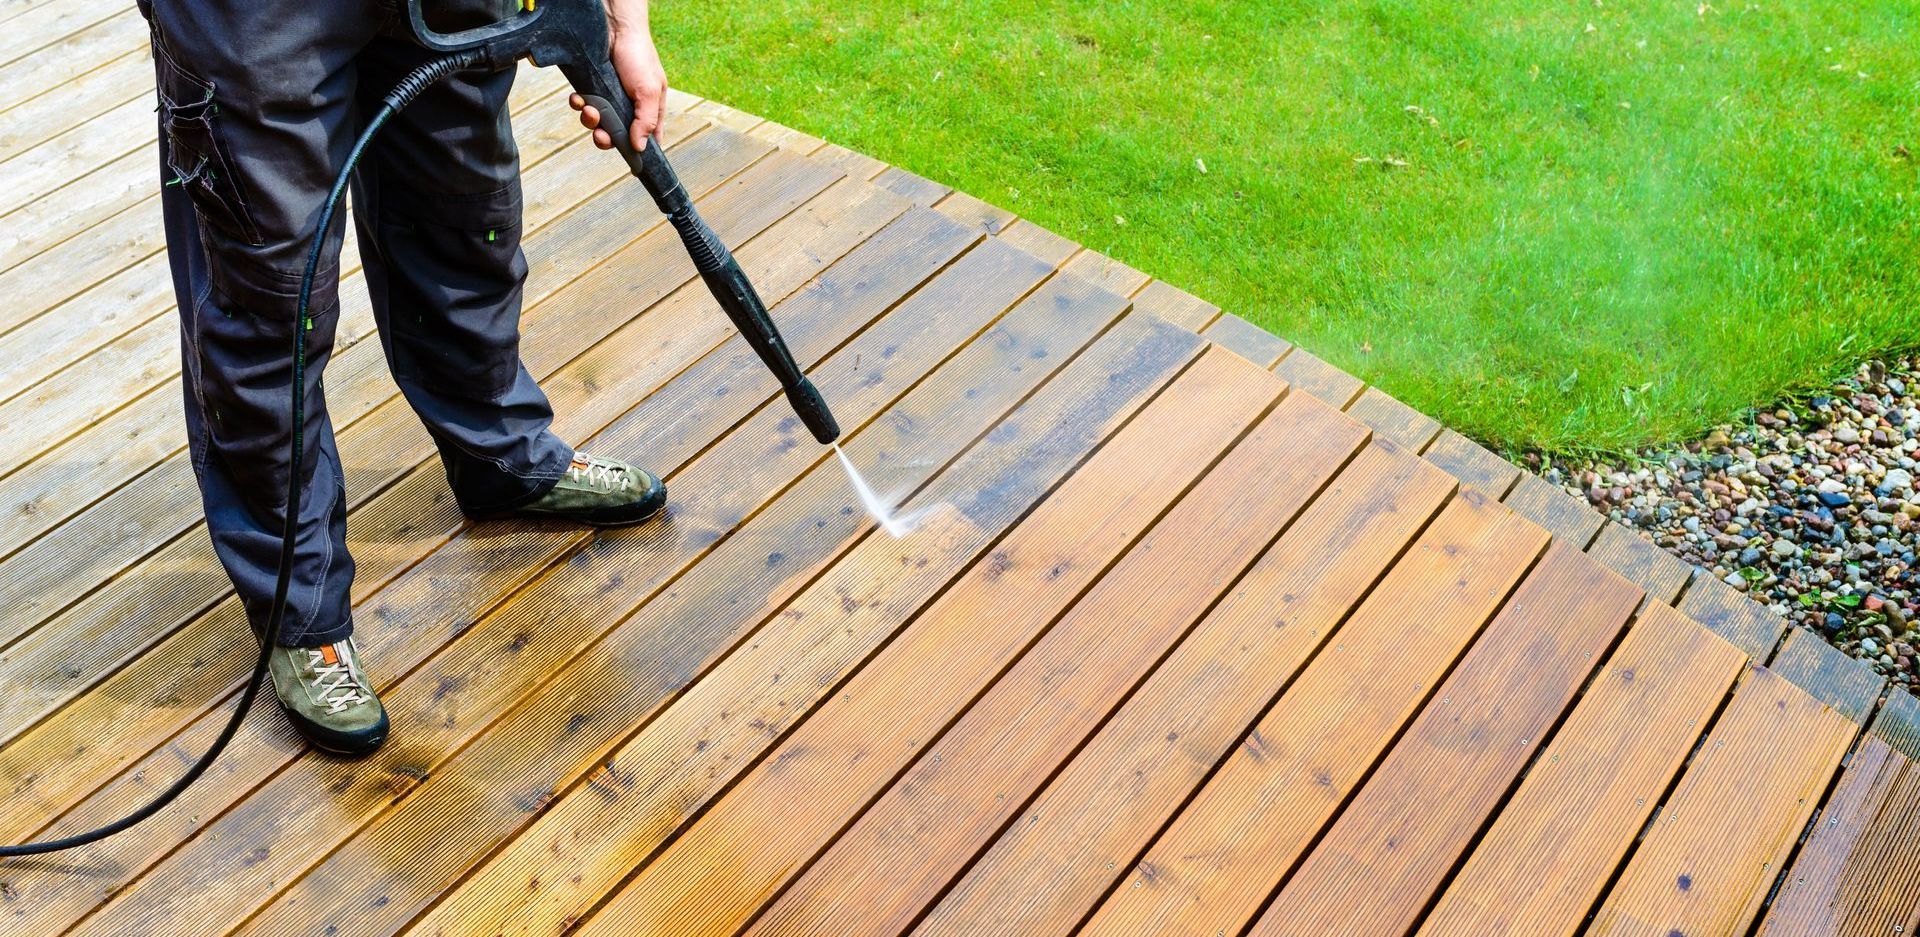 Best Residential Power Washing Company- Power Washer Owings Mills, MD